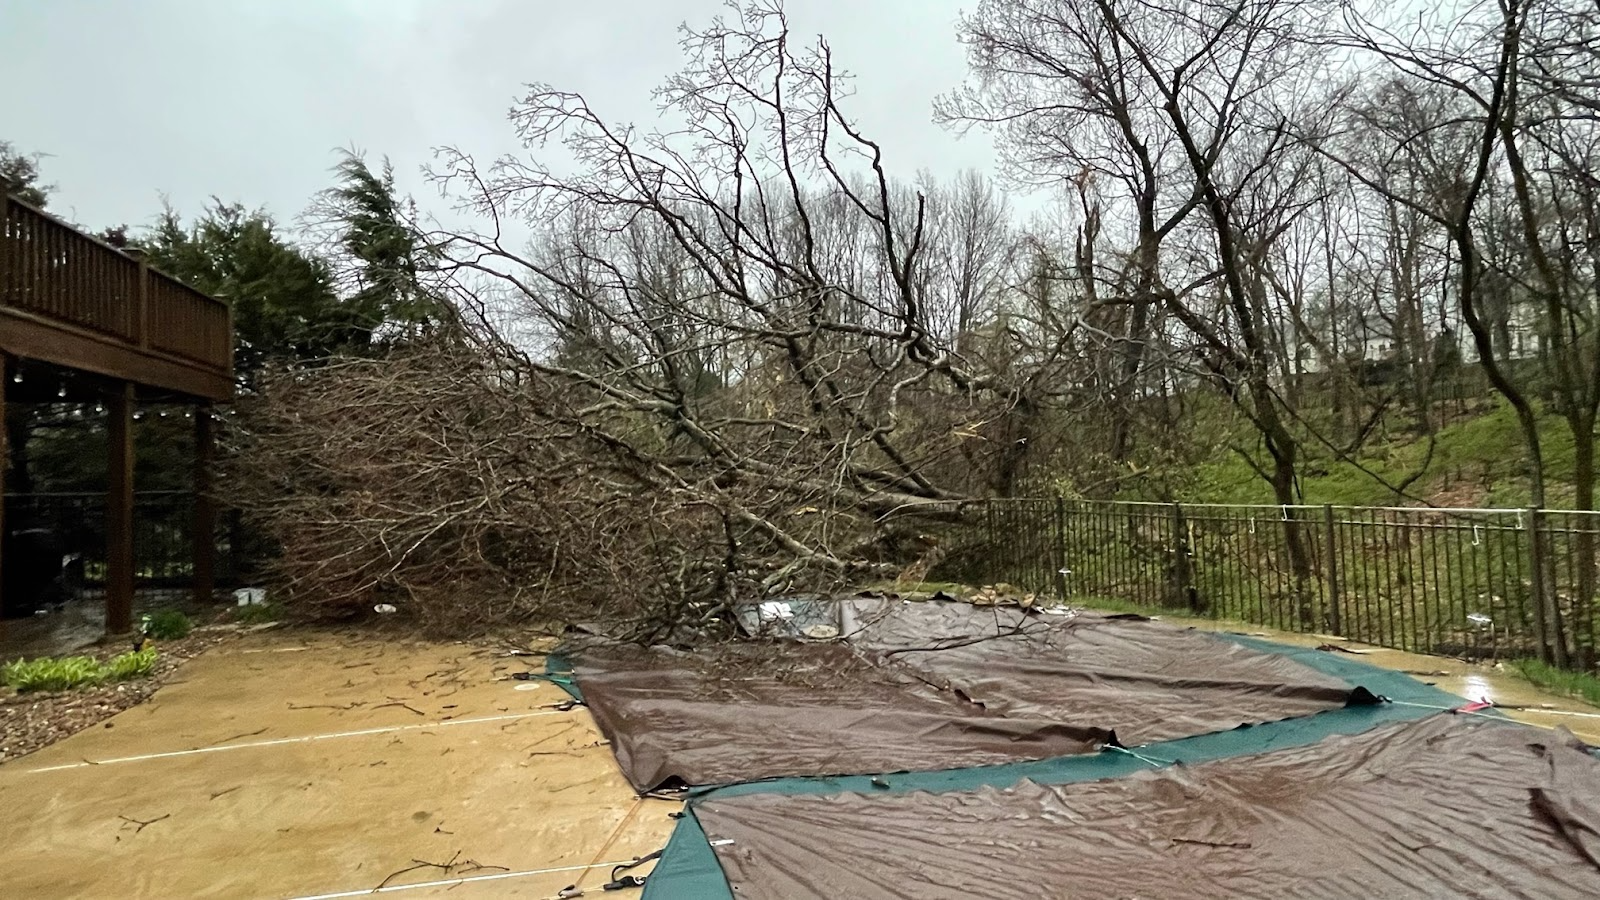 A view of several trees that have fallen into a backyard causing damage to pool and fencing.